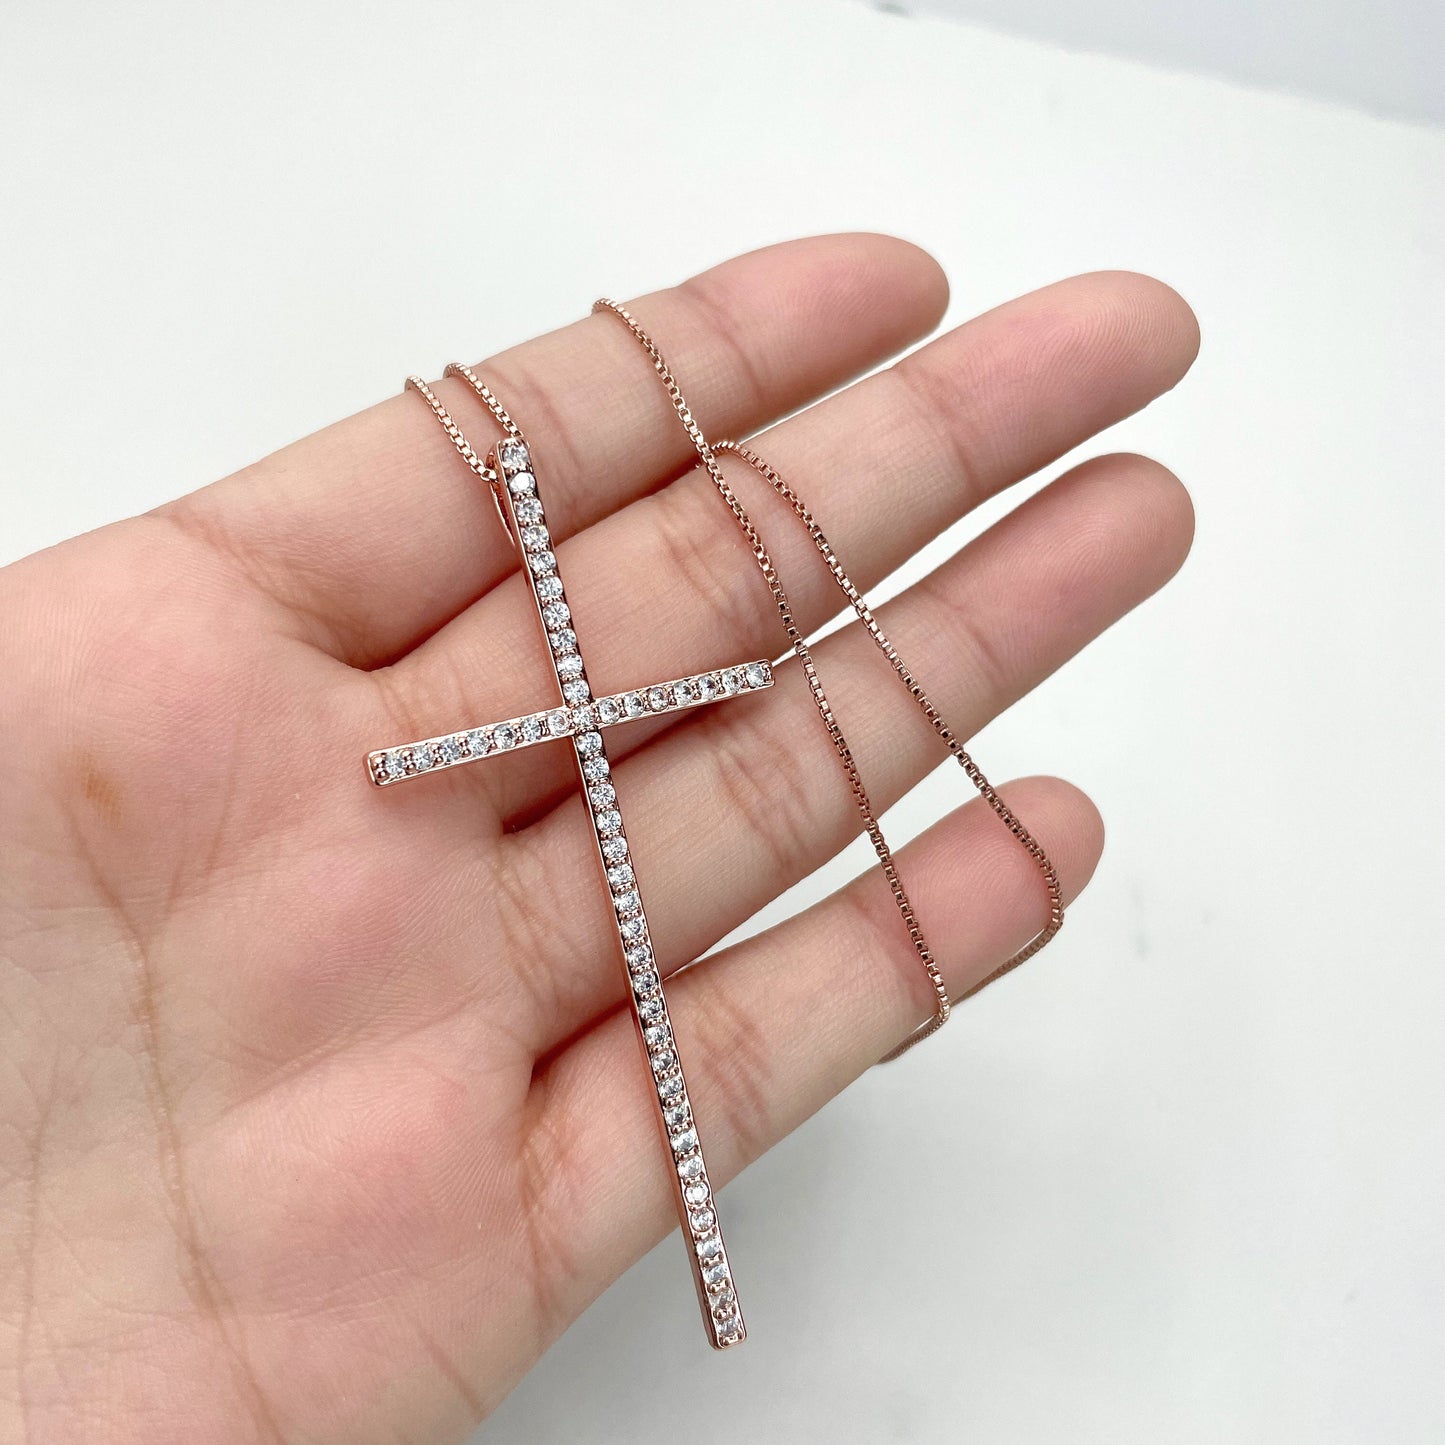 18k Rose Gold Filled 1mm Box Chain Necklace with Sparkling Cross Pendant Wholesale Jewelry Making Supplies